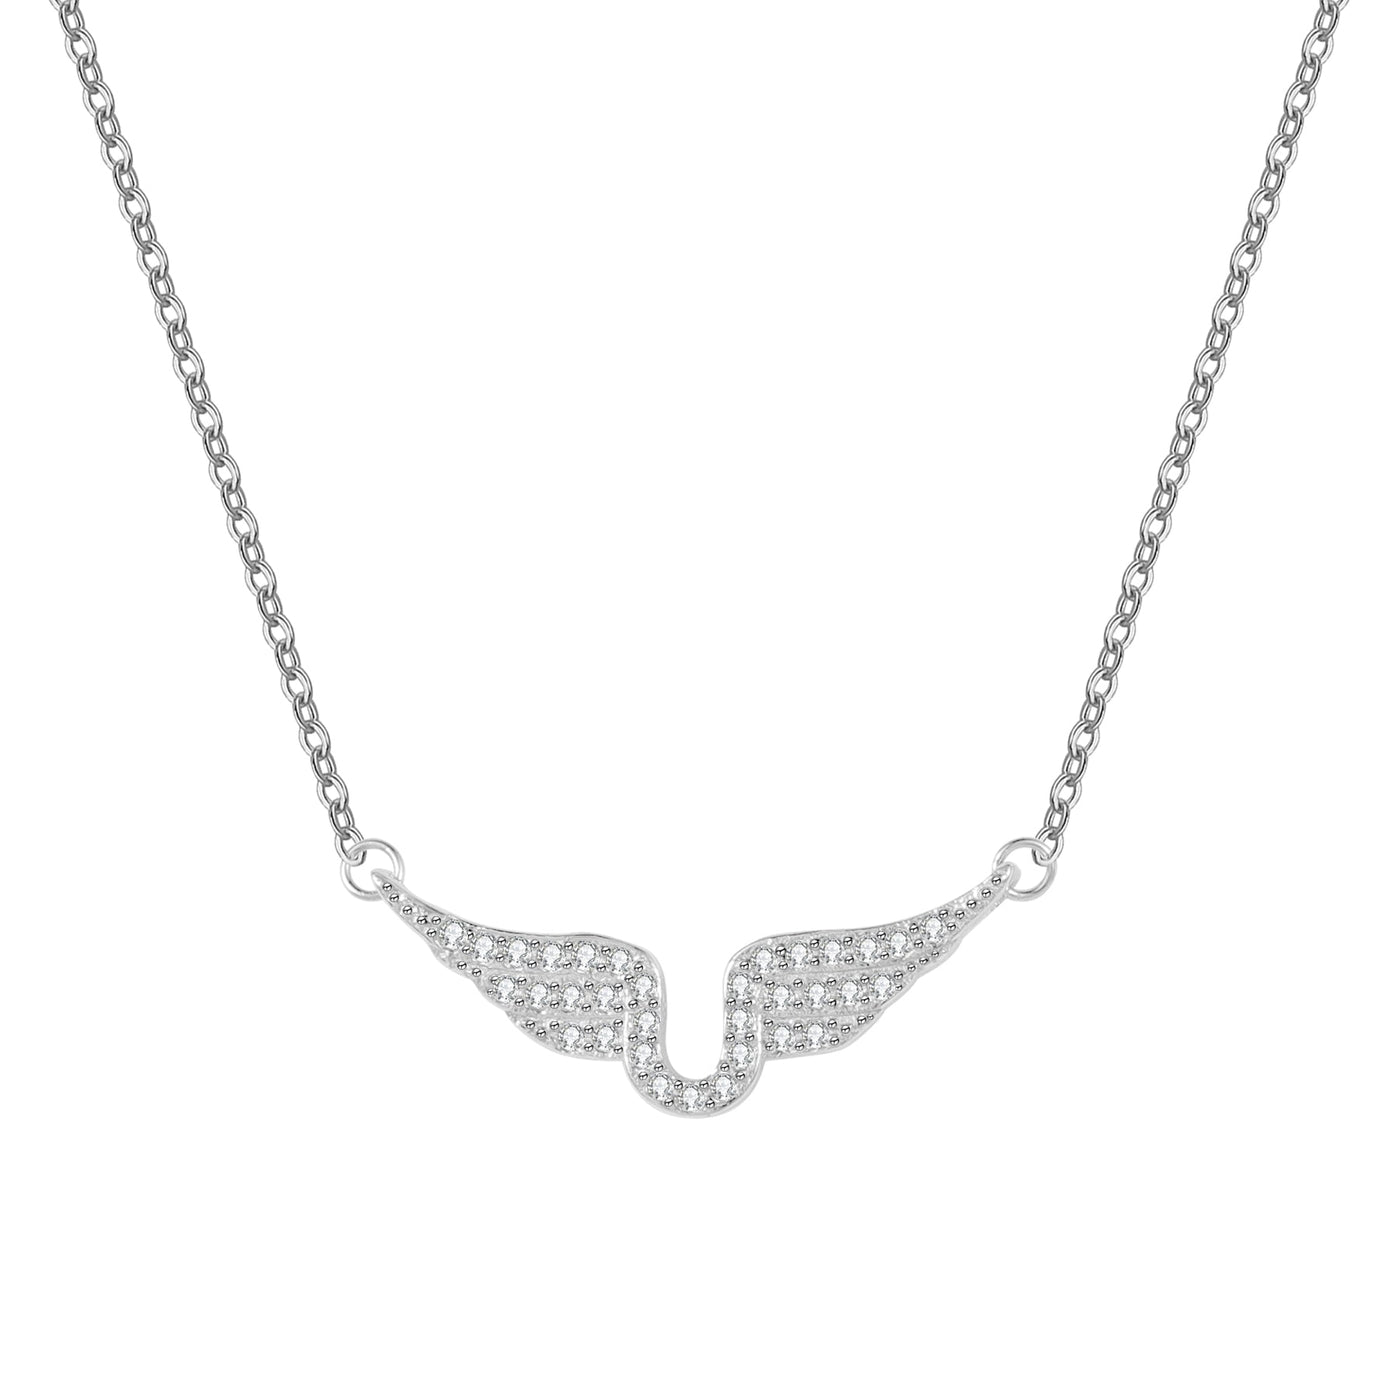 ANGEL OF PROTECTION NECKLACE - HouseofLx-18K White Gold